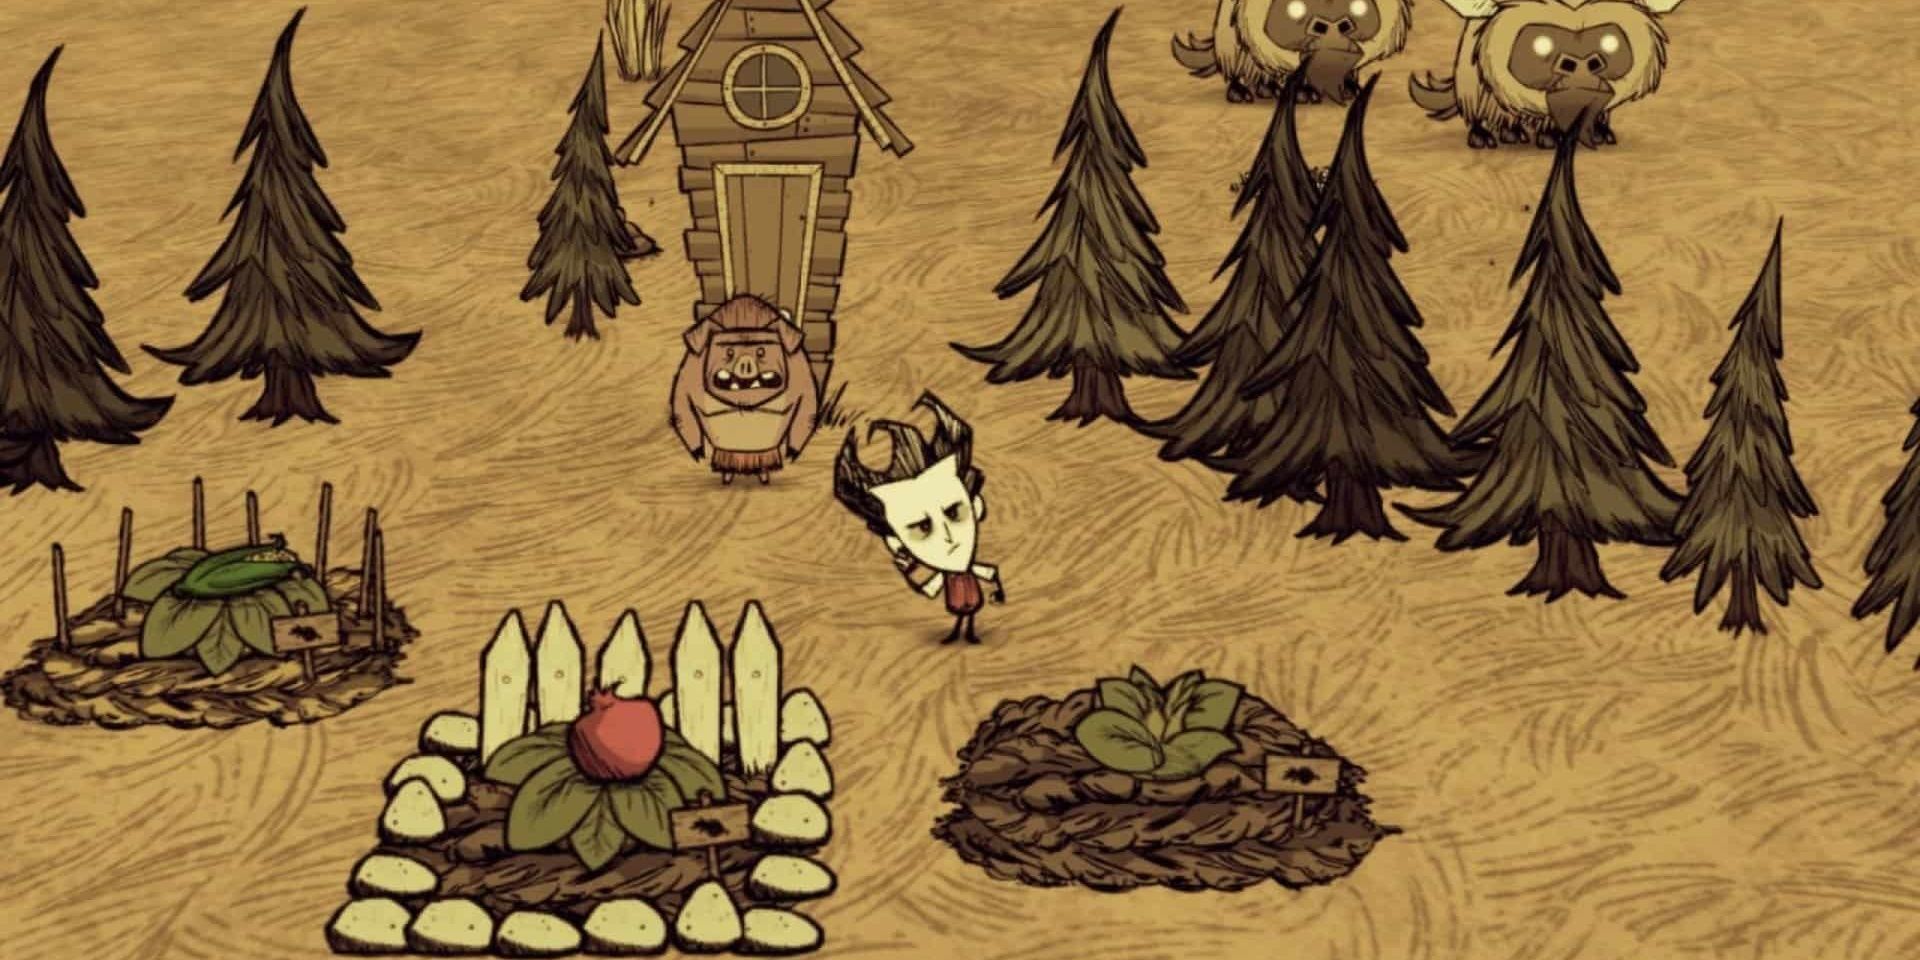 Wilson from Don't Starve next to a small farm. 